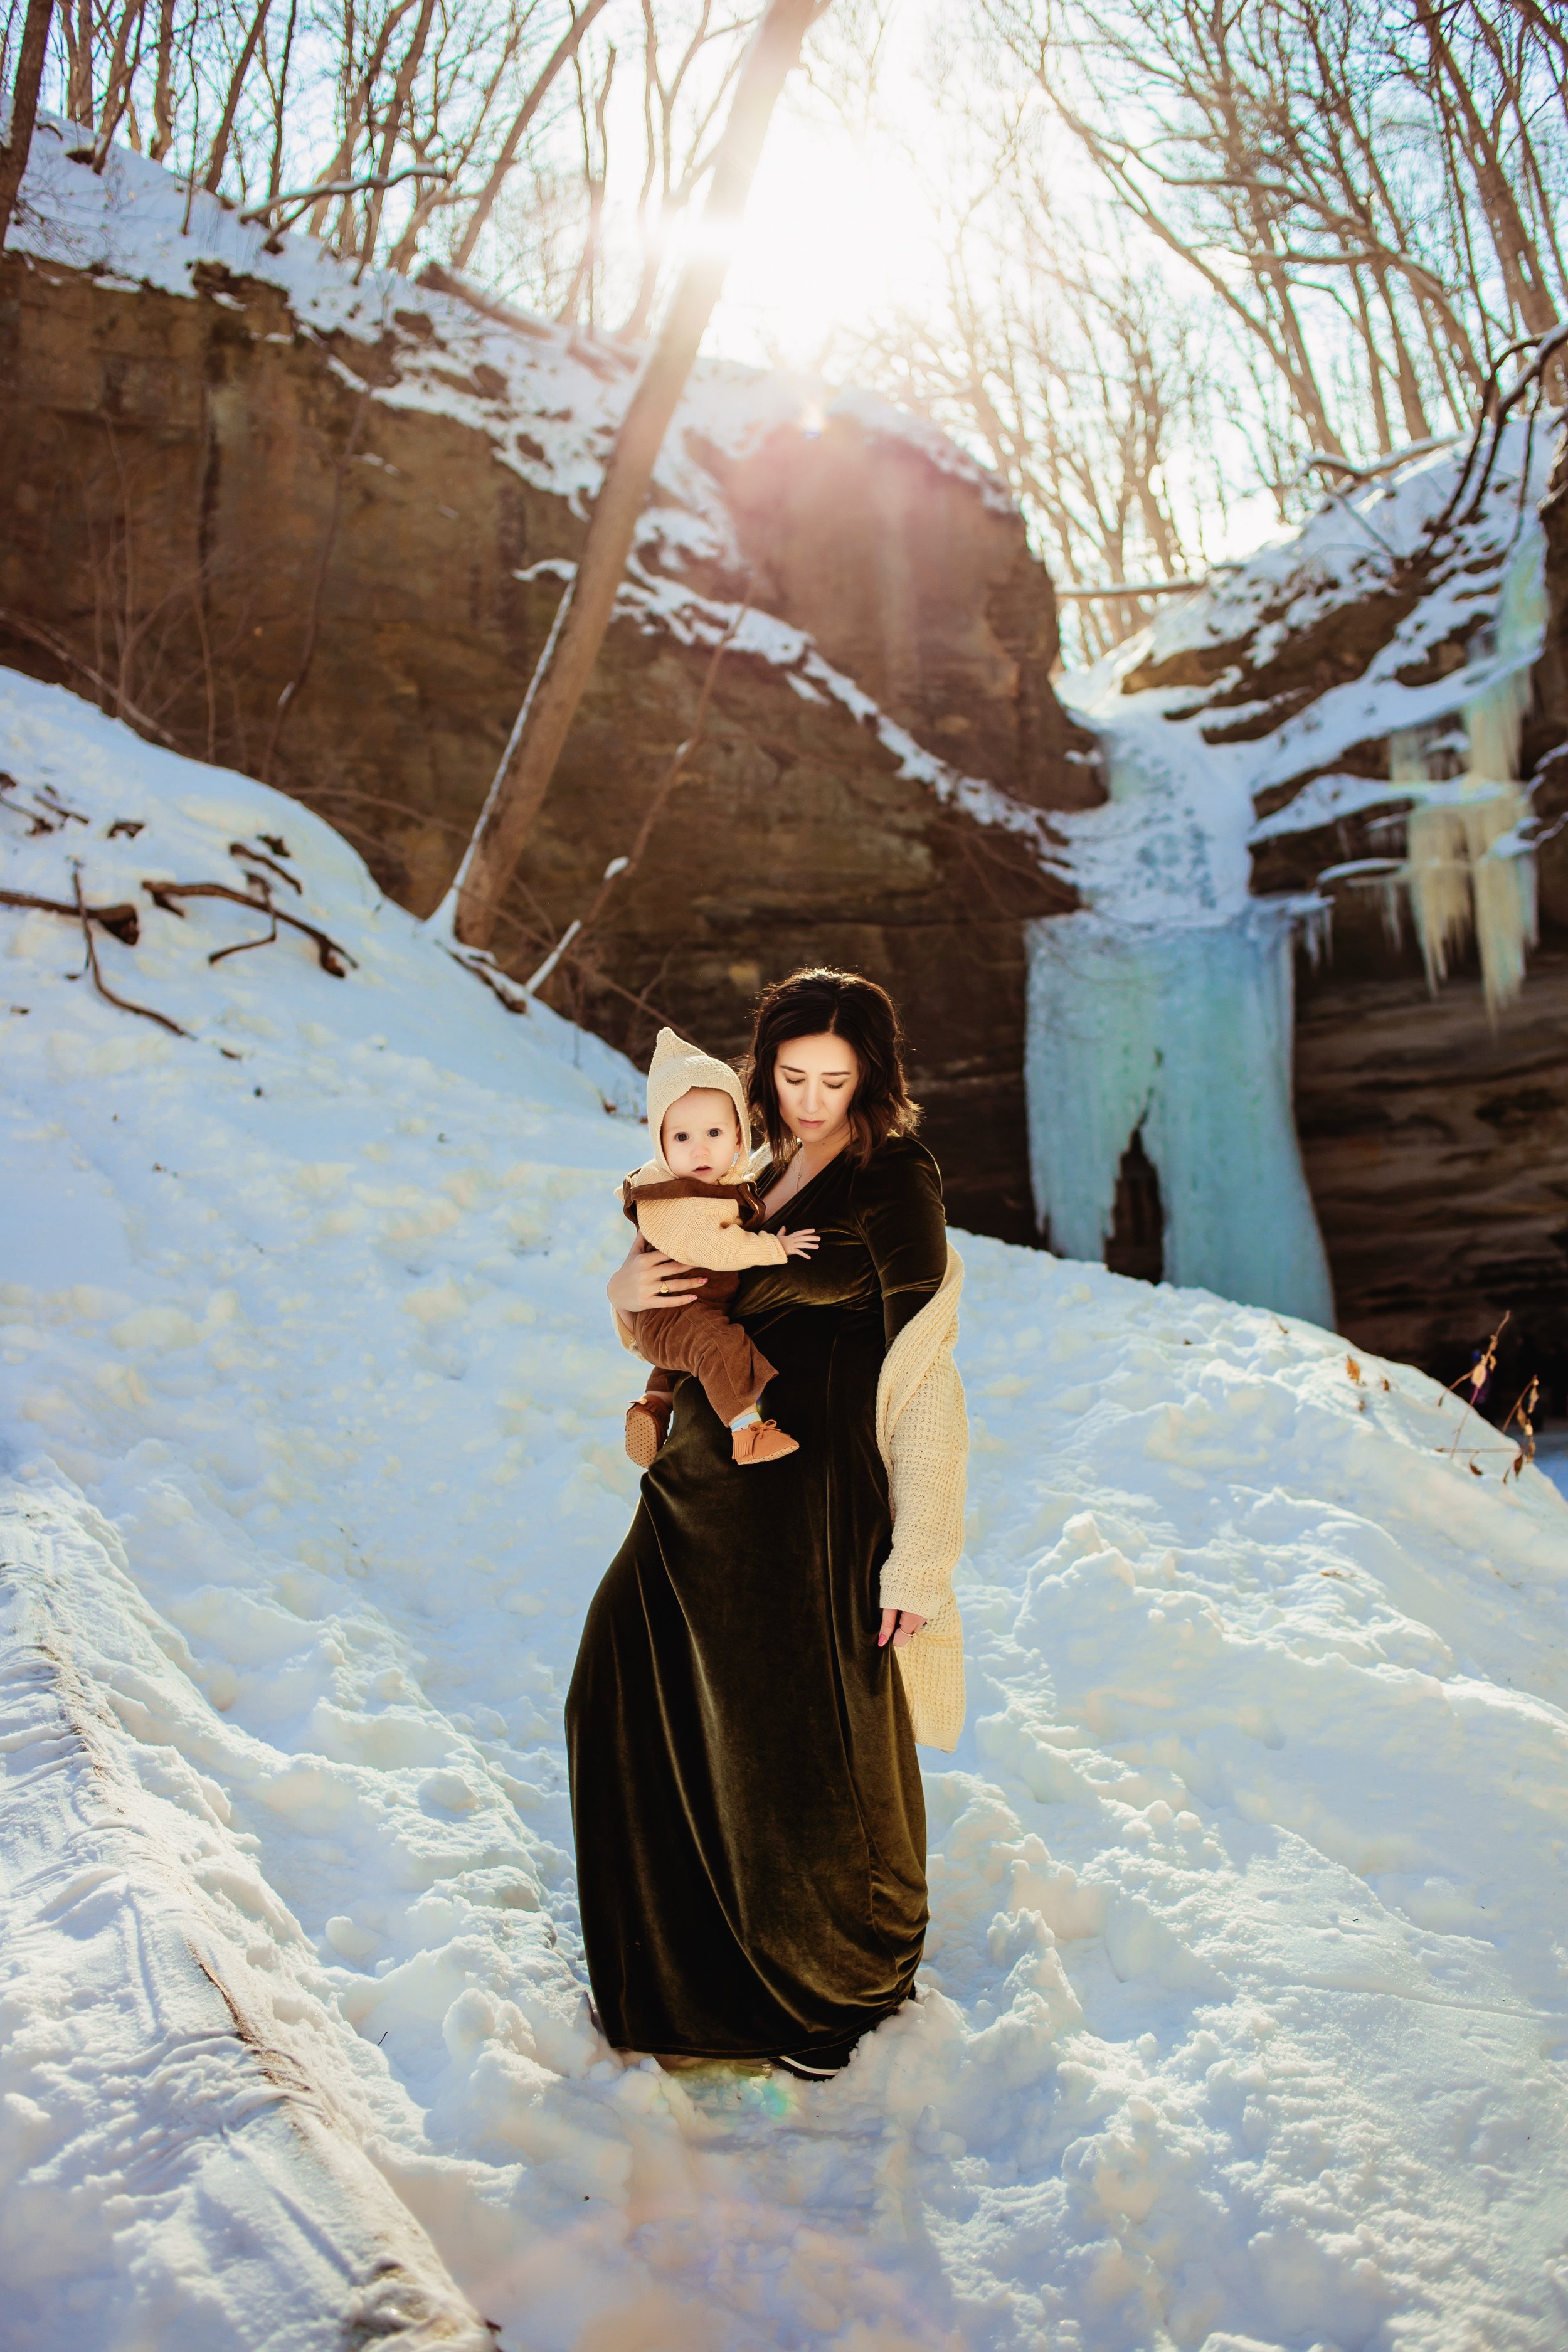  Teala Ward Photography captures a mother walking down a snowy hill with her child in her arms. winter motherhood photography #TealaWardPhotography #TealaWardNursing #StarvedRockStatePark #nursingbaby #breastfedbabyphotography #motherandbaby 